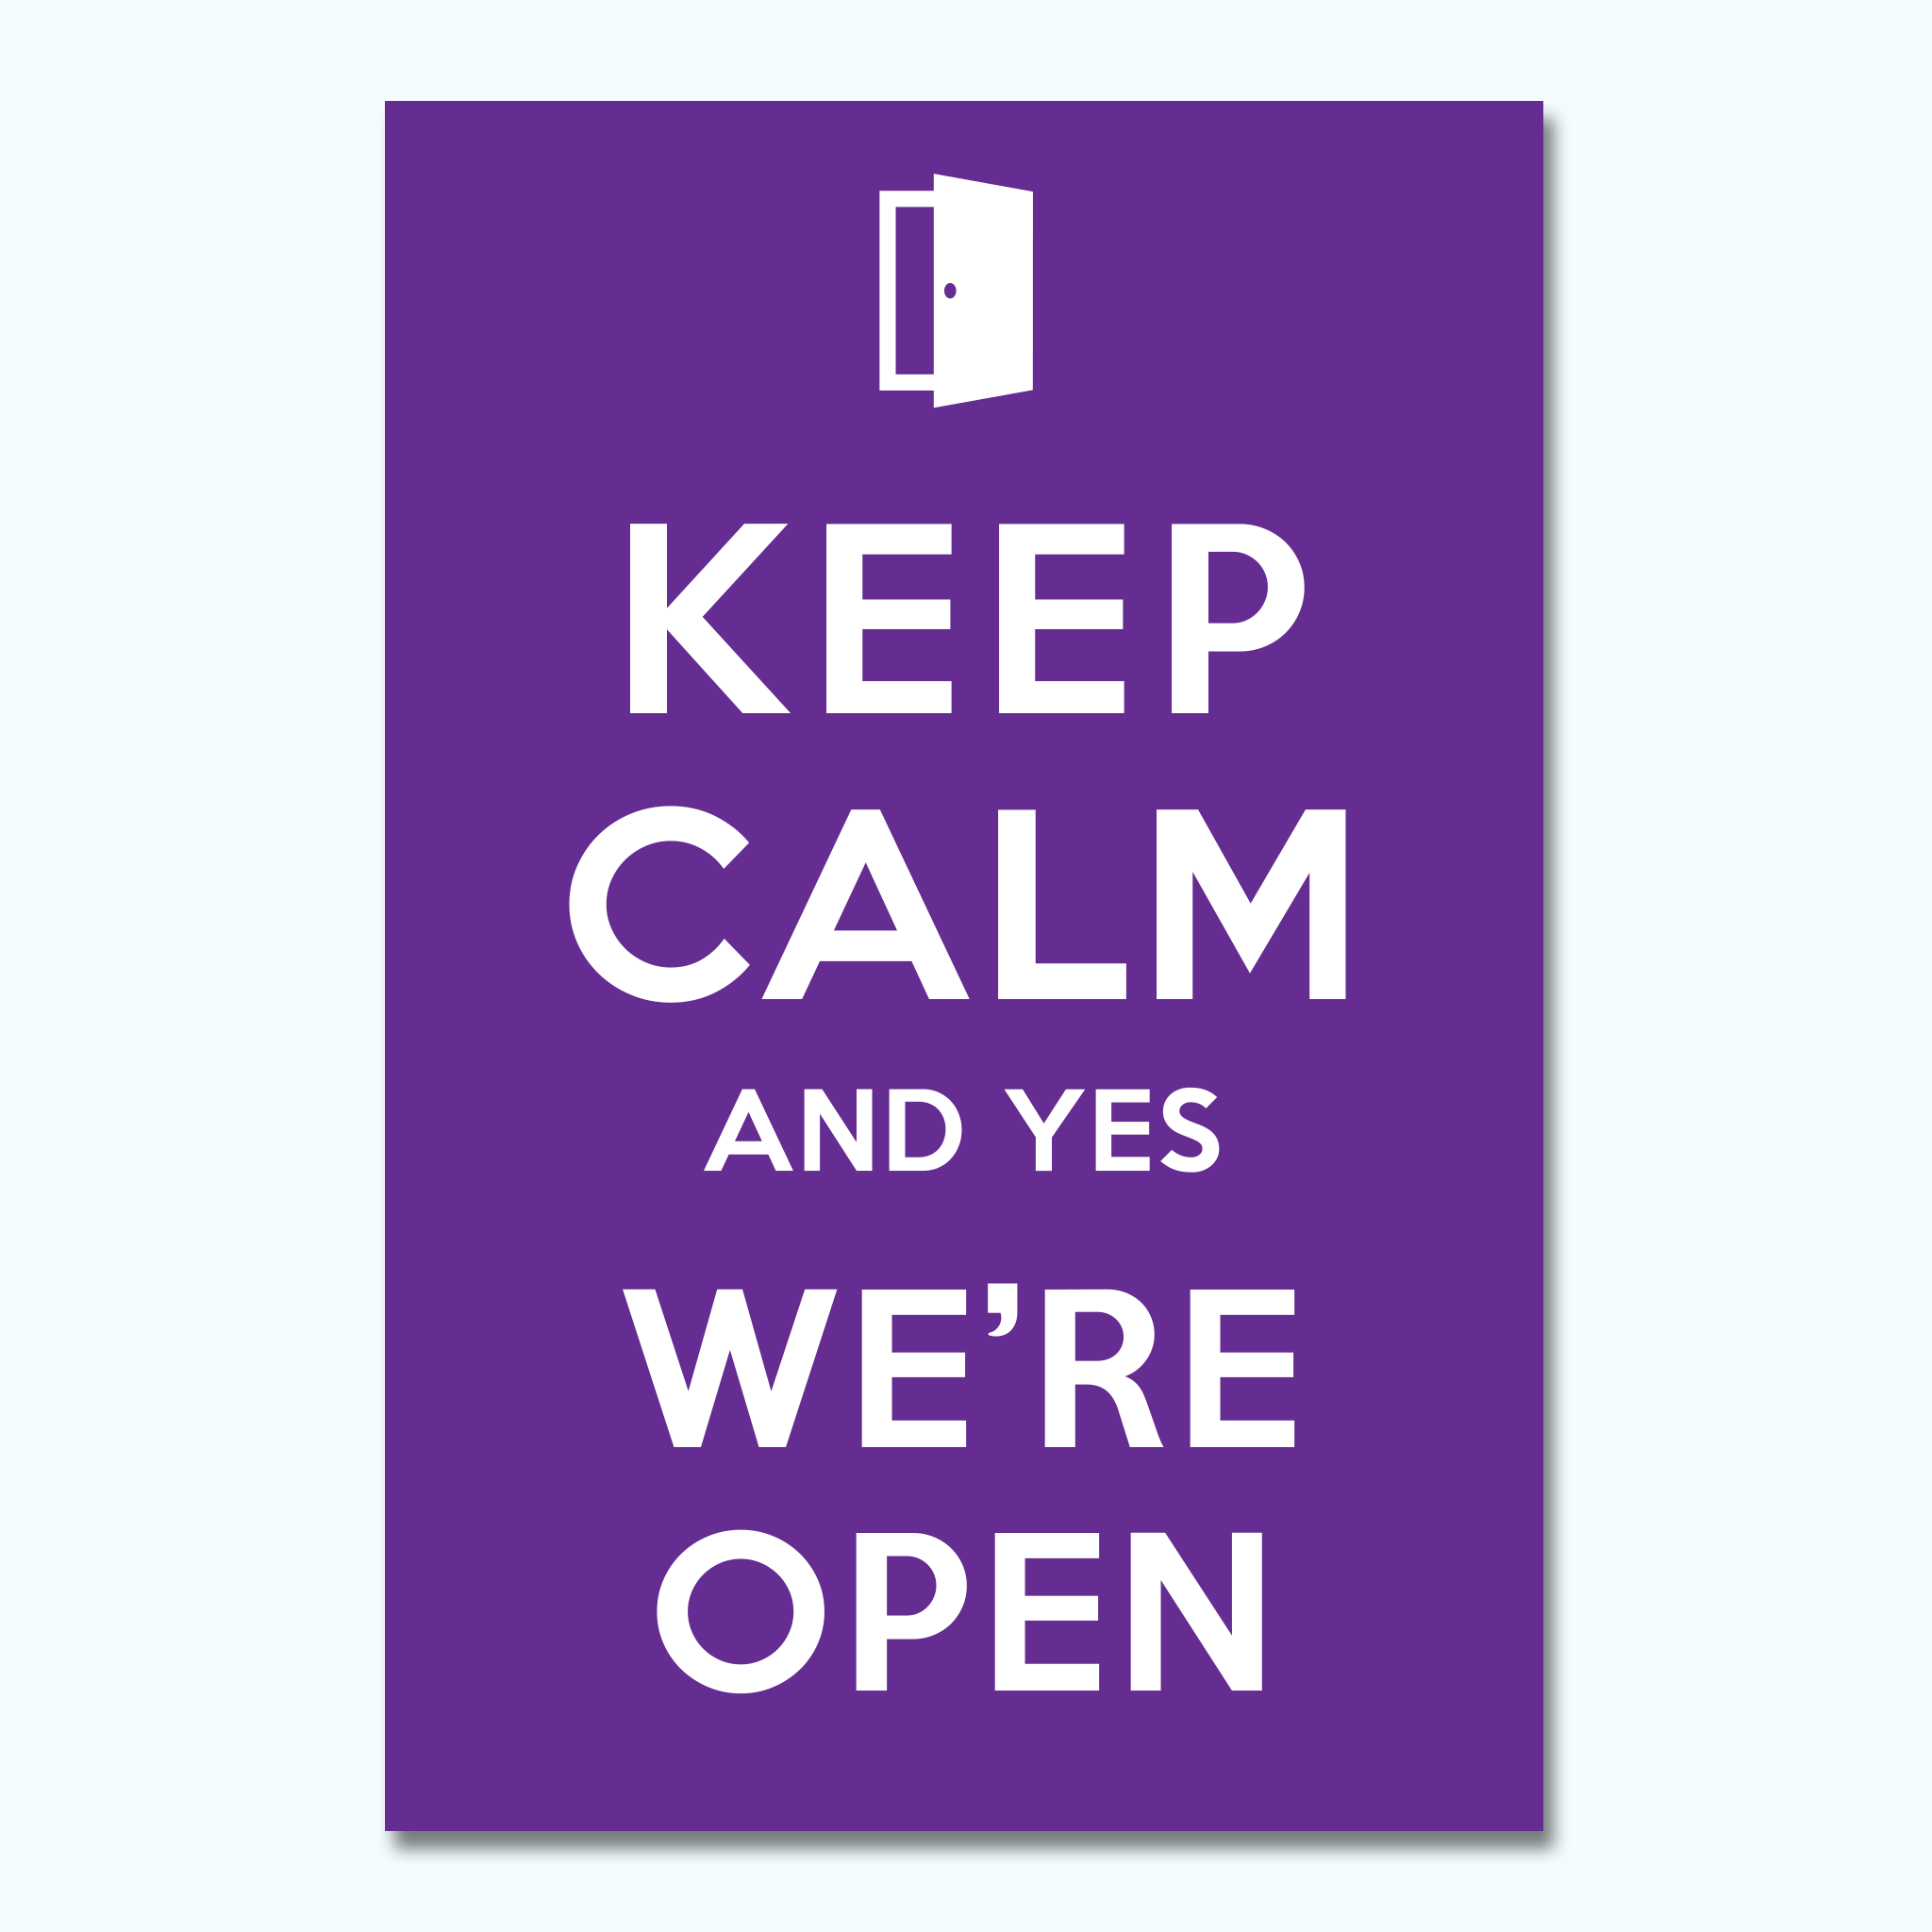 Paul Diniakos - Keep Calm and Yes We're Open